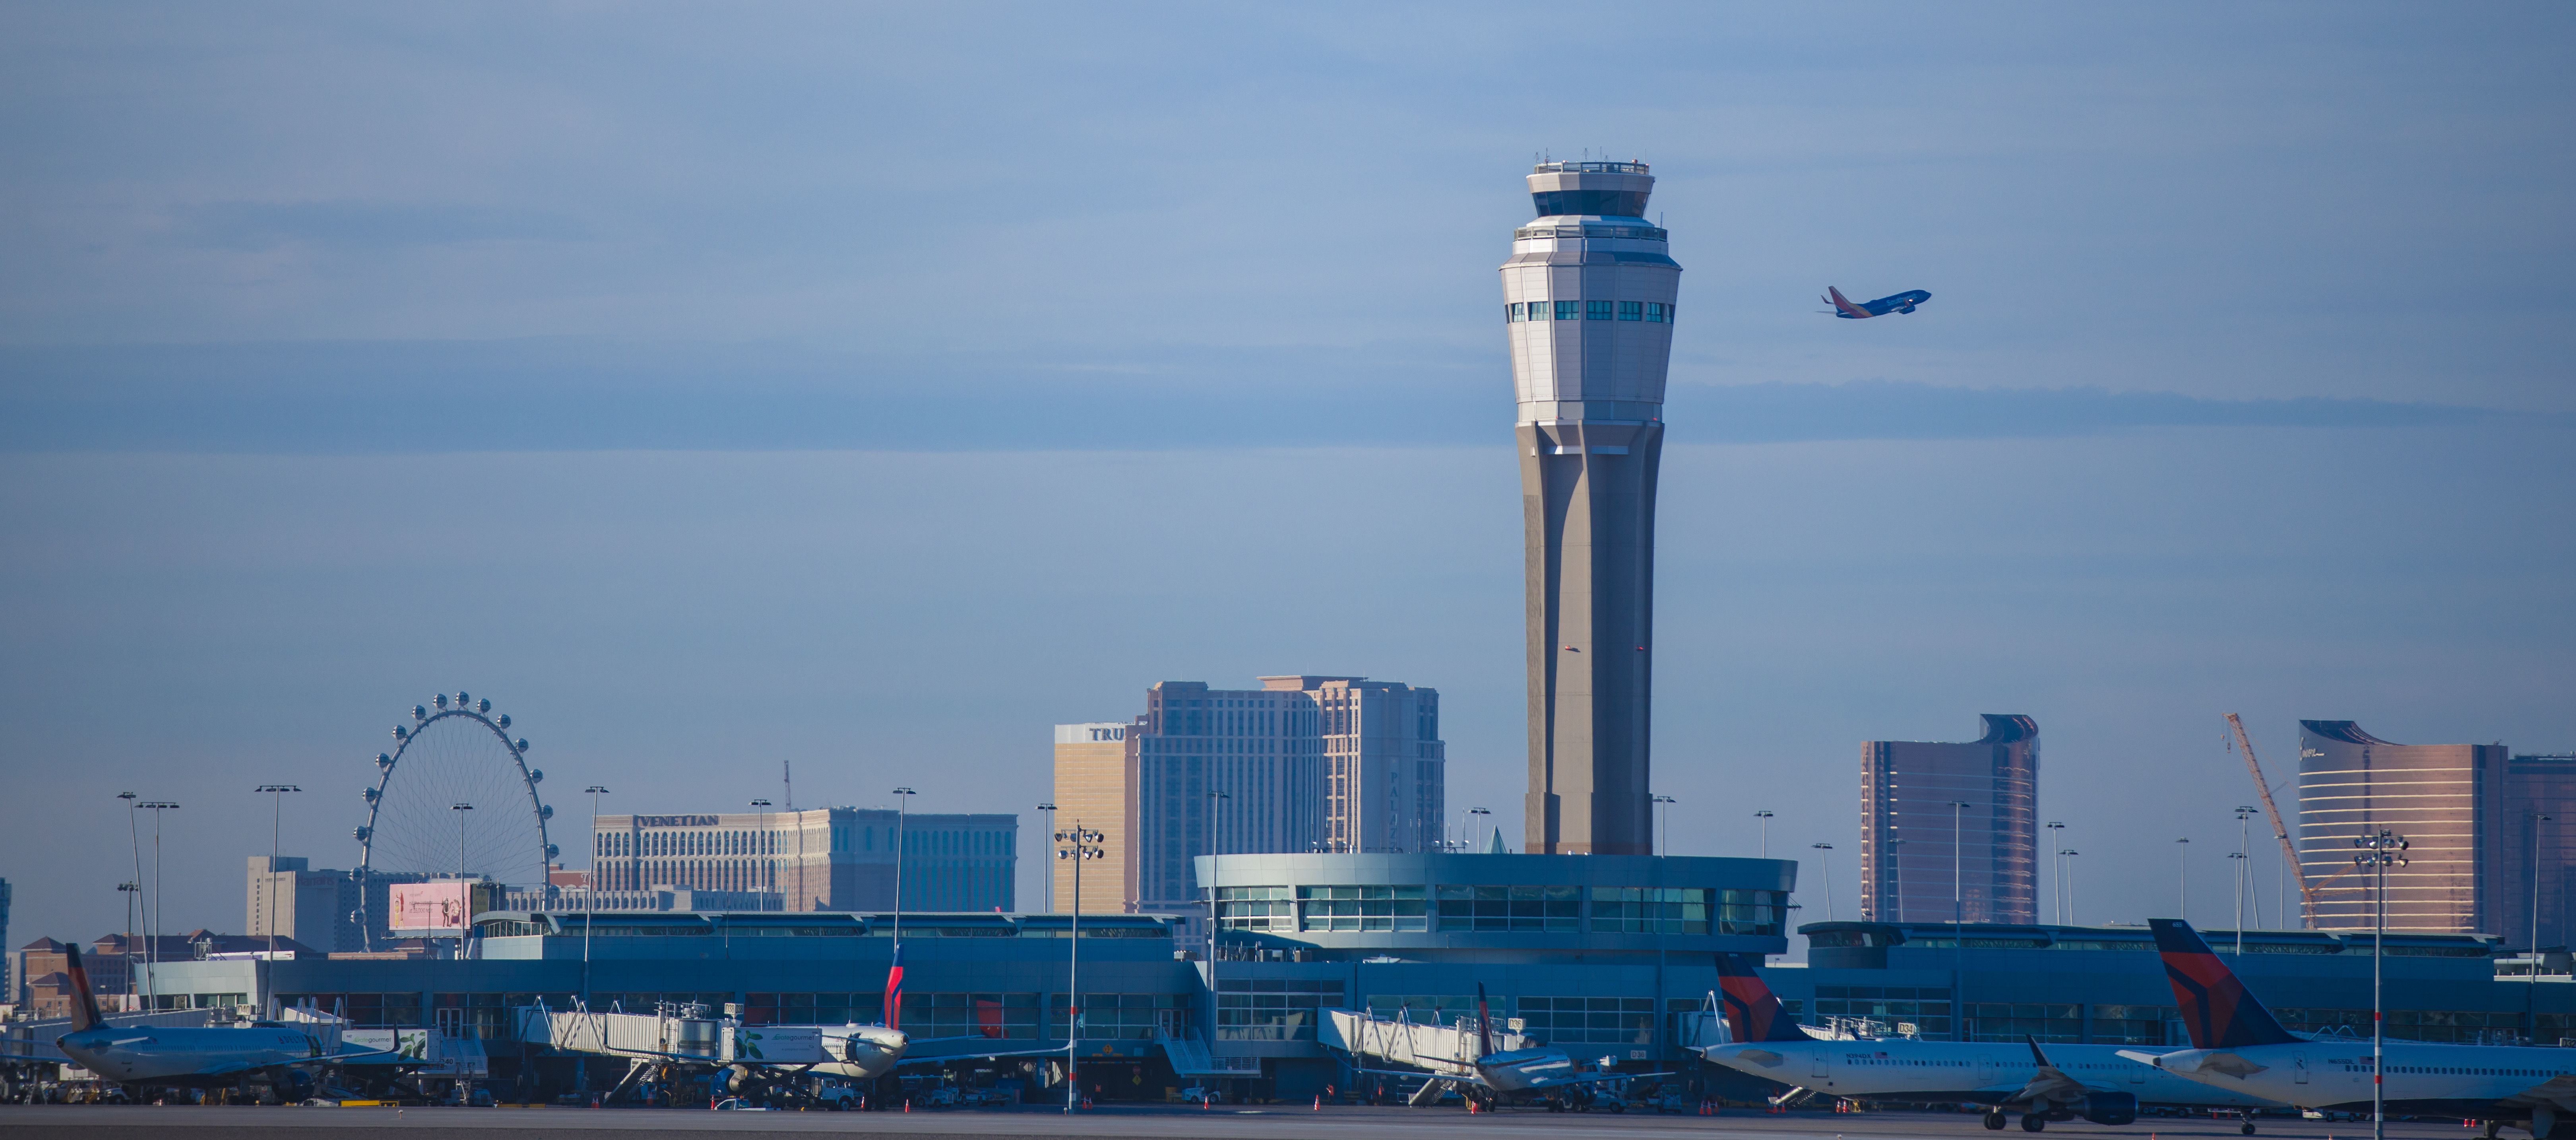 Harry Reid International Airport and part of the Las Vegas Strip in the background.